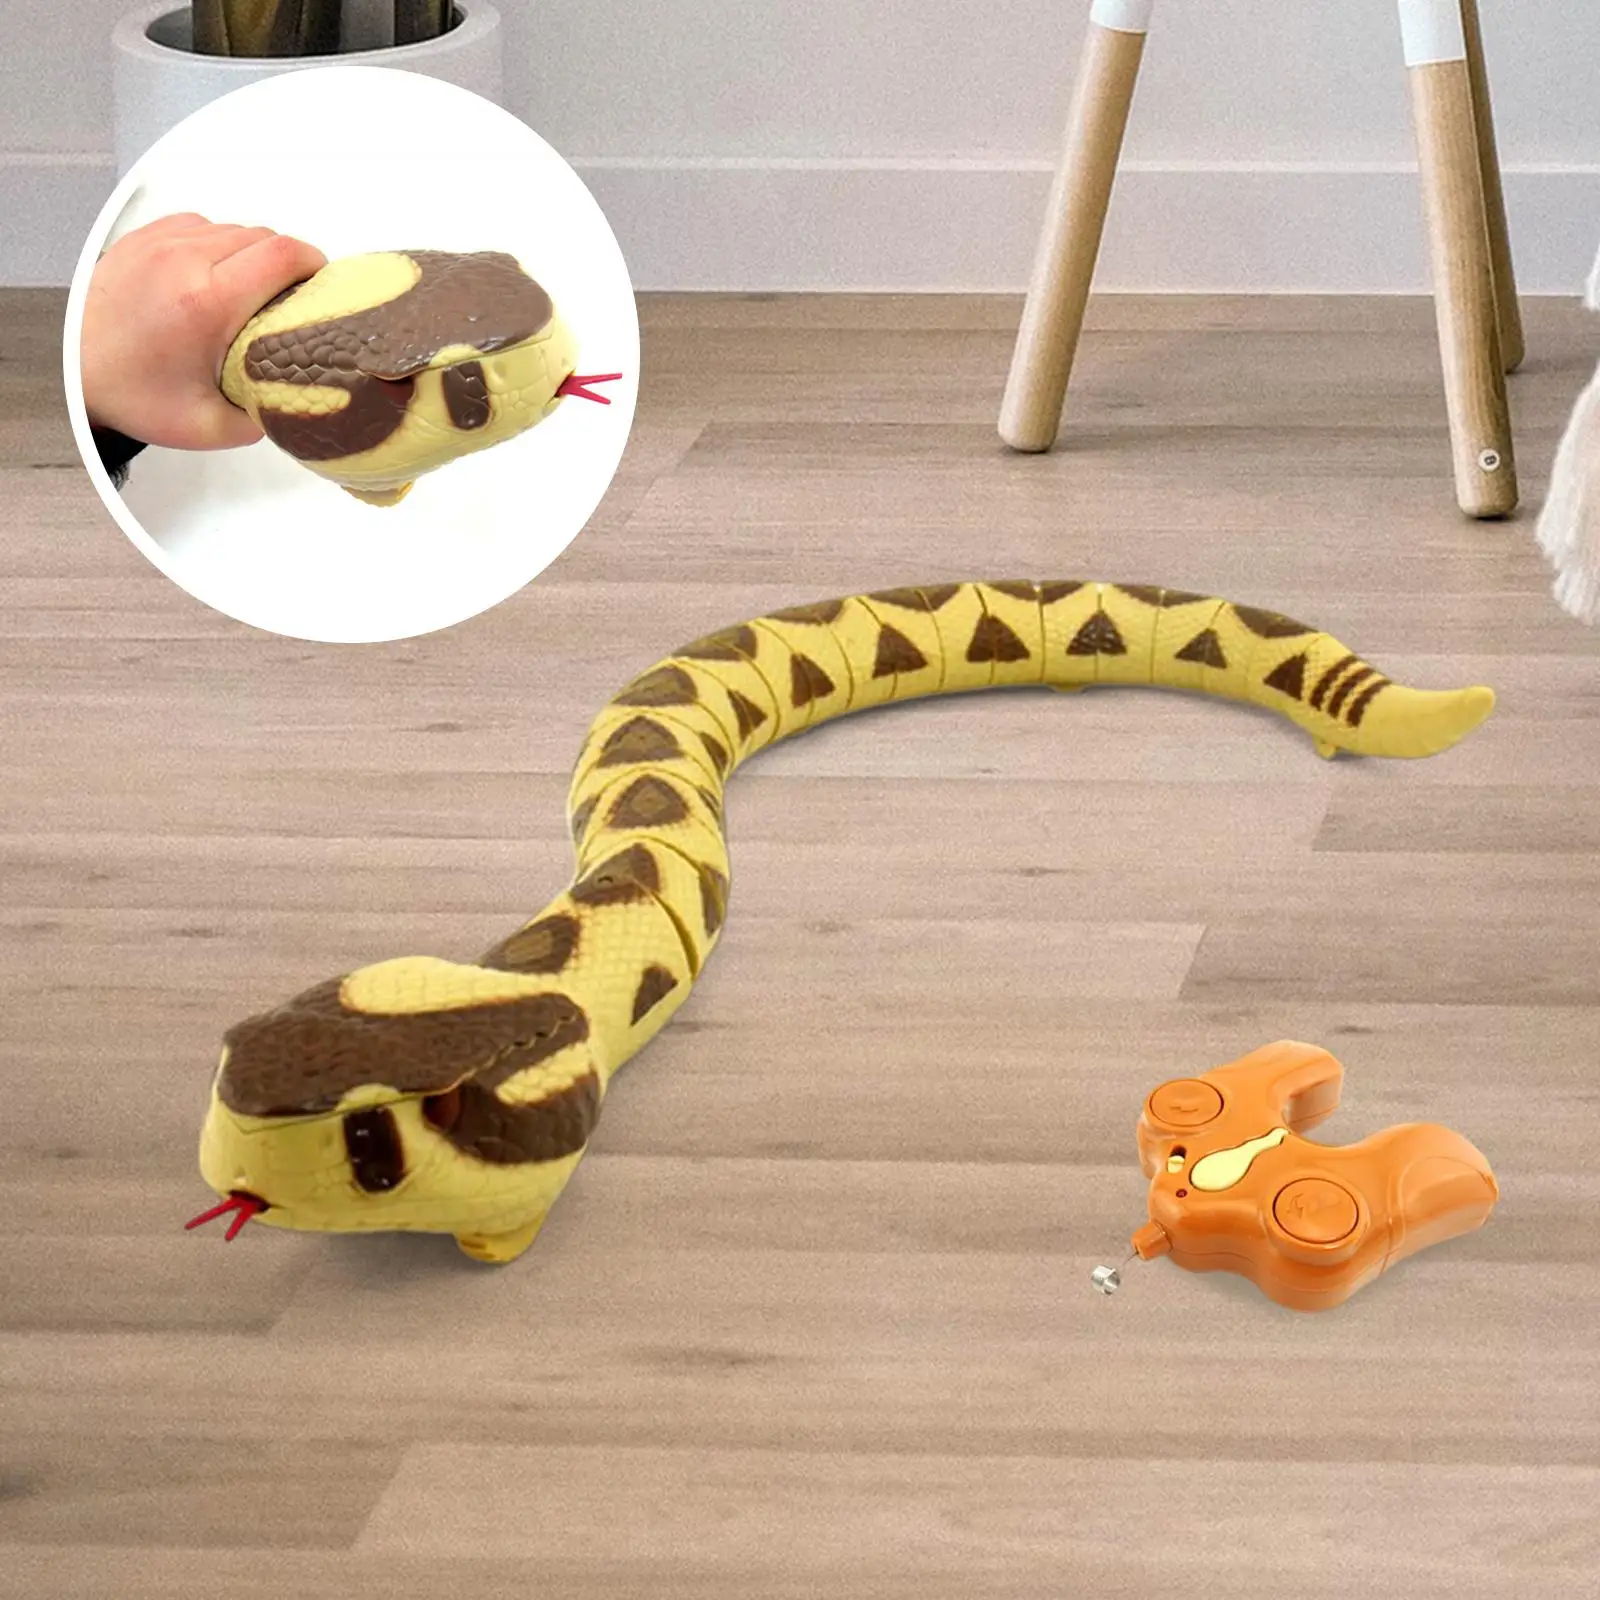 Lifelike RC Snake Toys Artifical Snake Model Halloween Tricks Toy for Party Tabletop Decors Jokes Prop Holiday Gifts